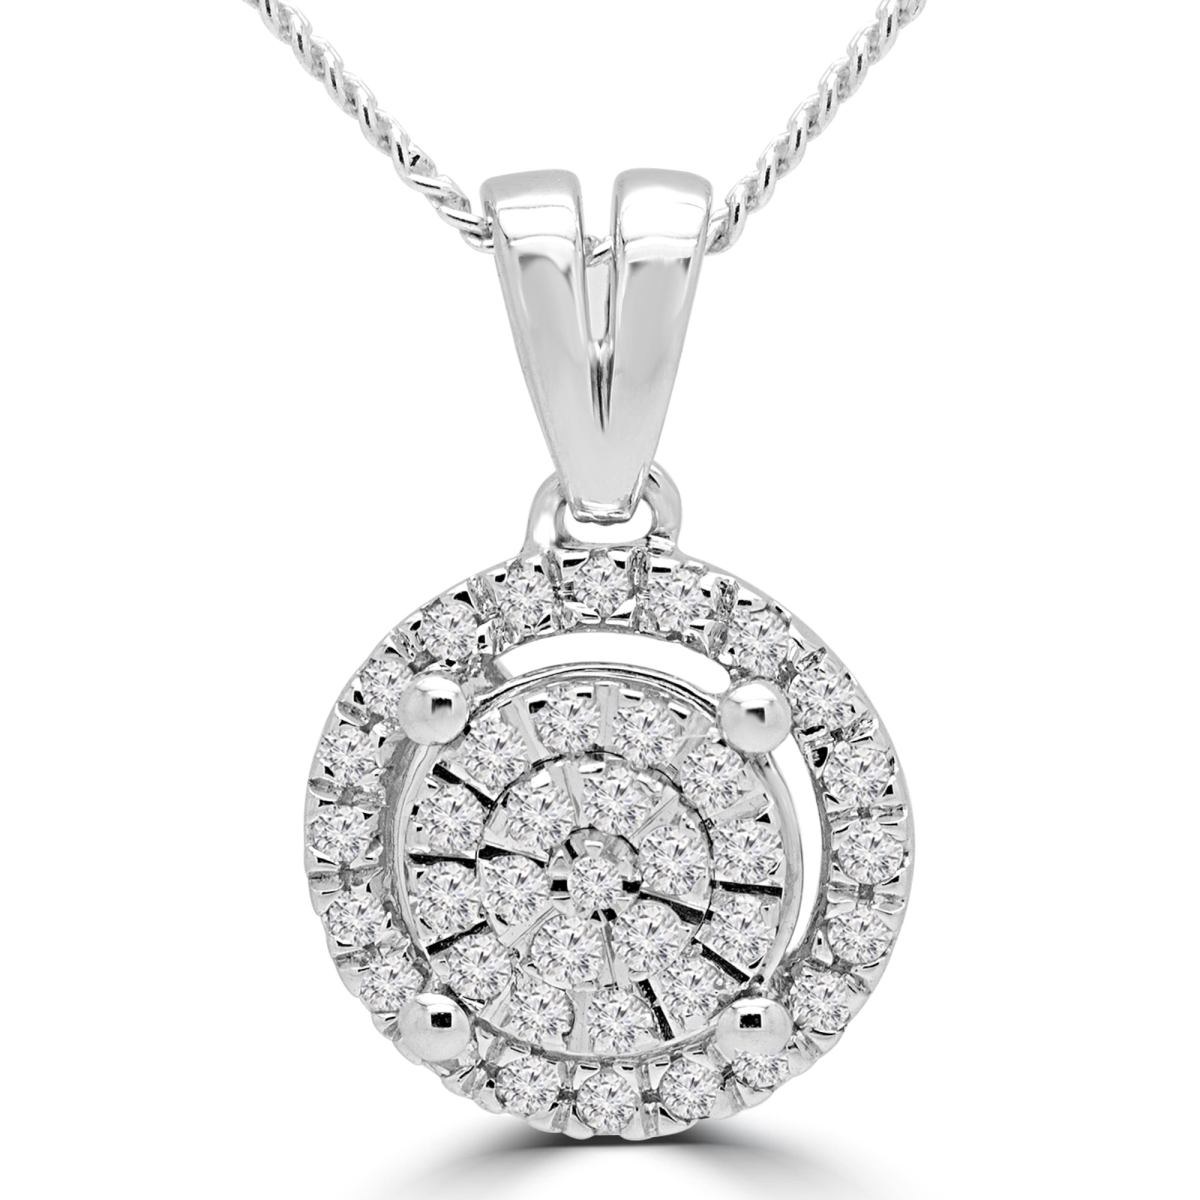 Mdr180020 0.2 Ctw Round Diamond Halo Cluster Pendant Necklace In 10k White Gold With Chain